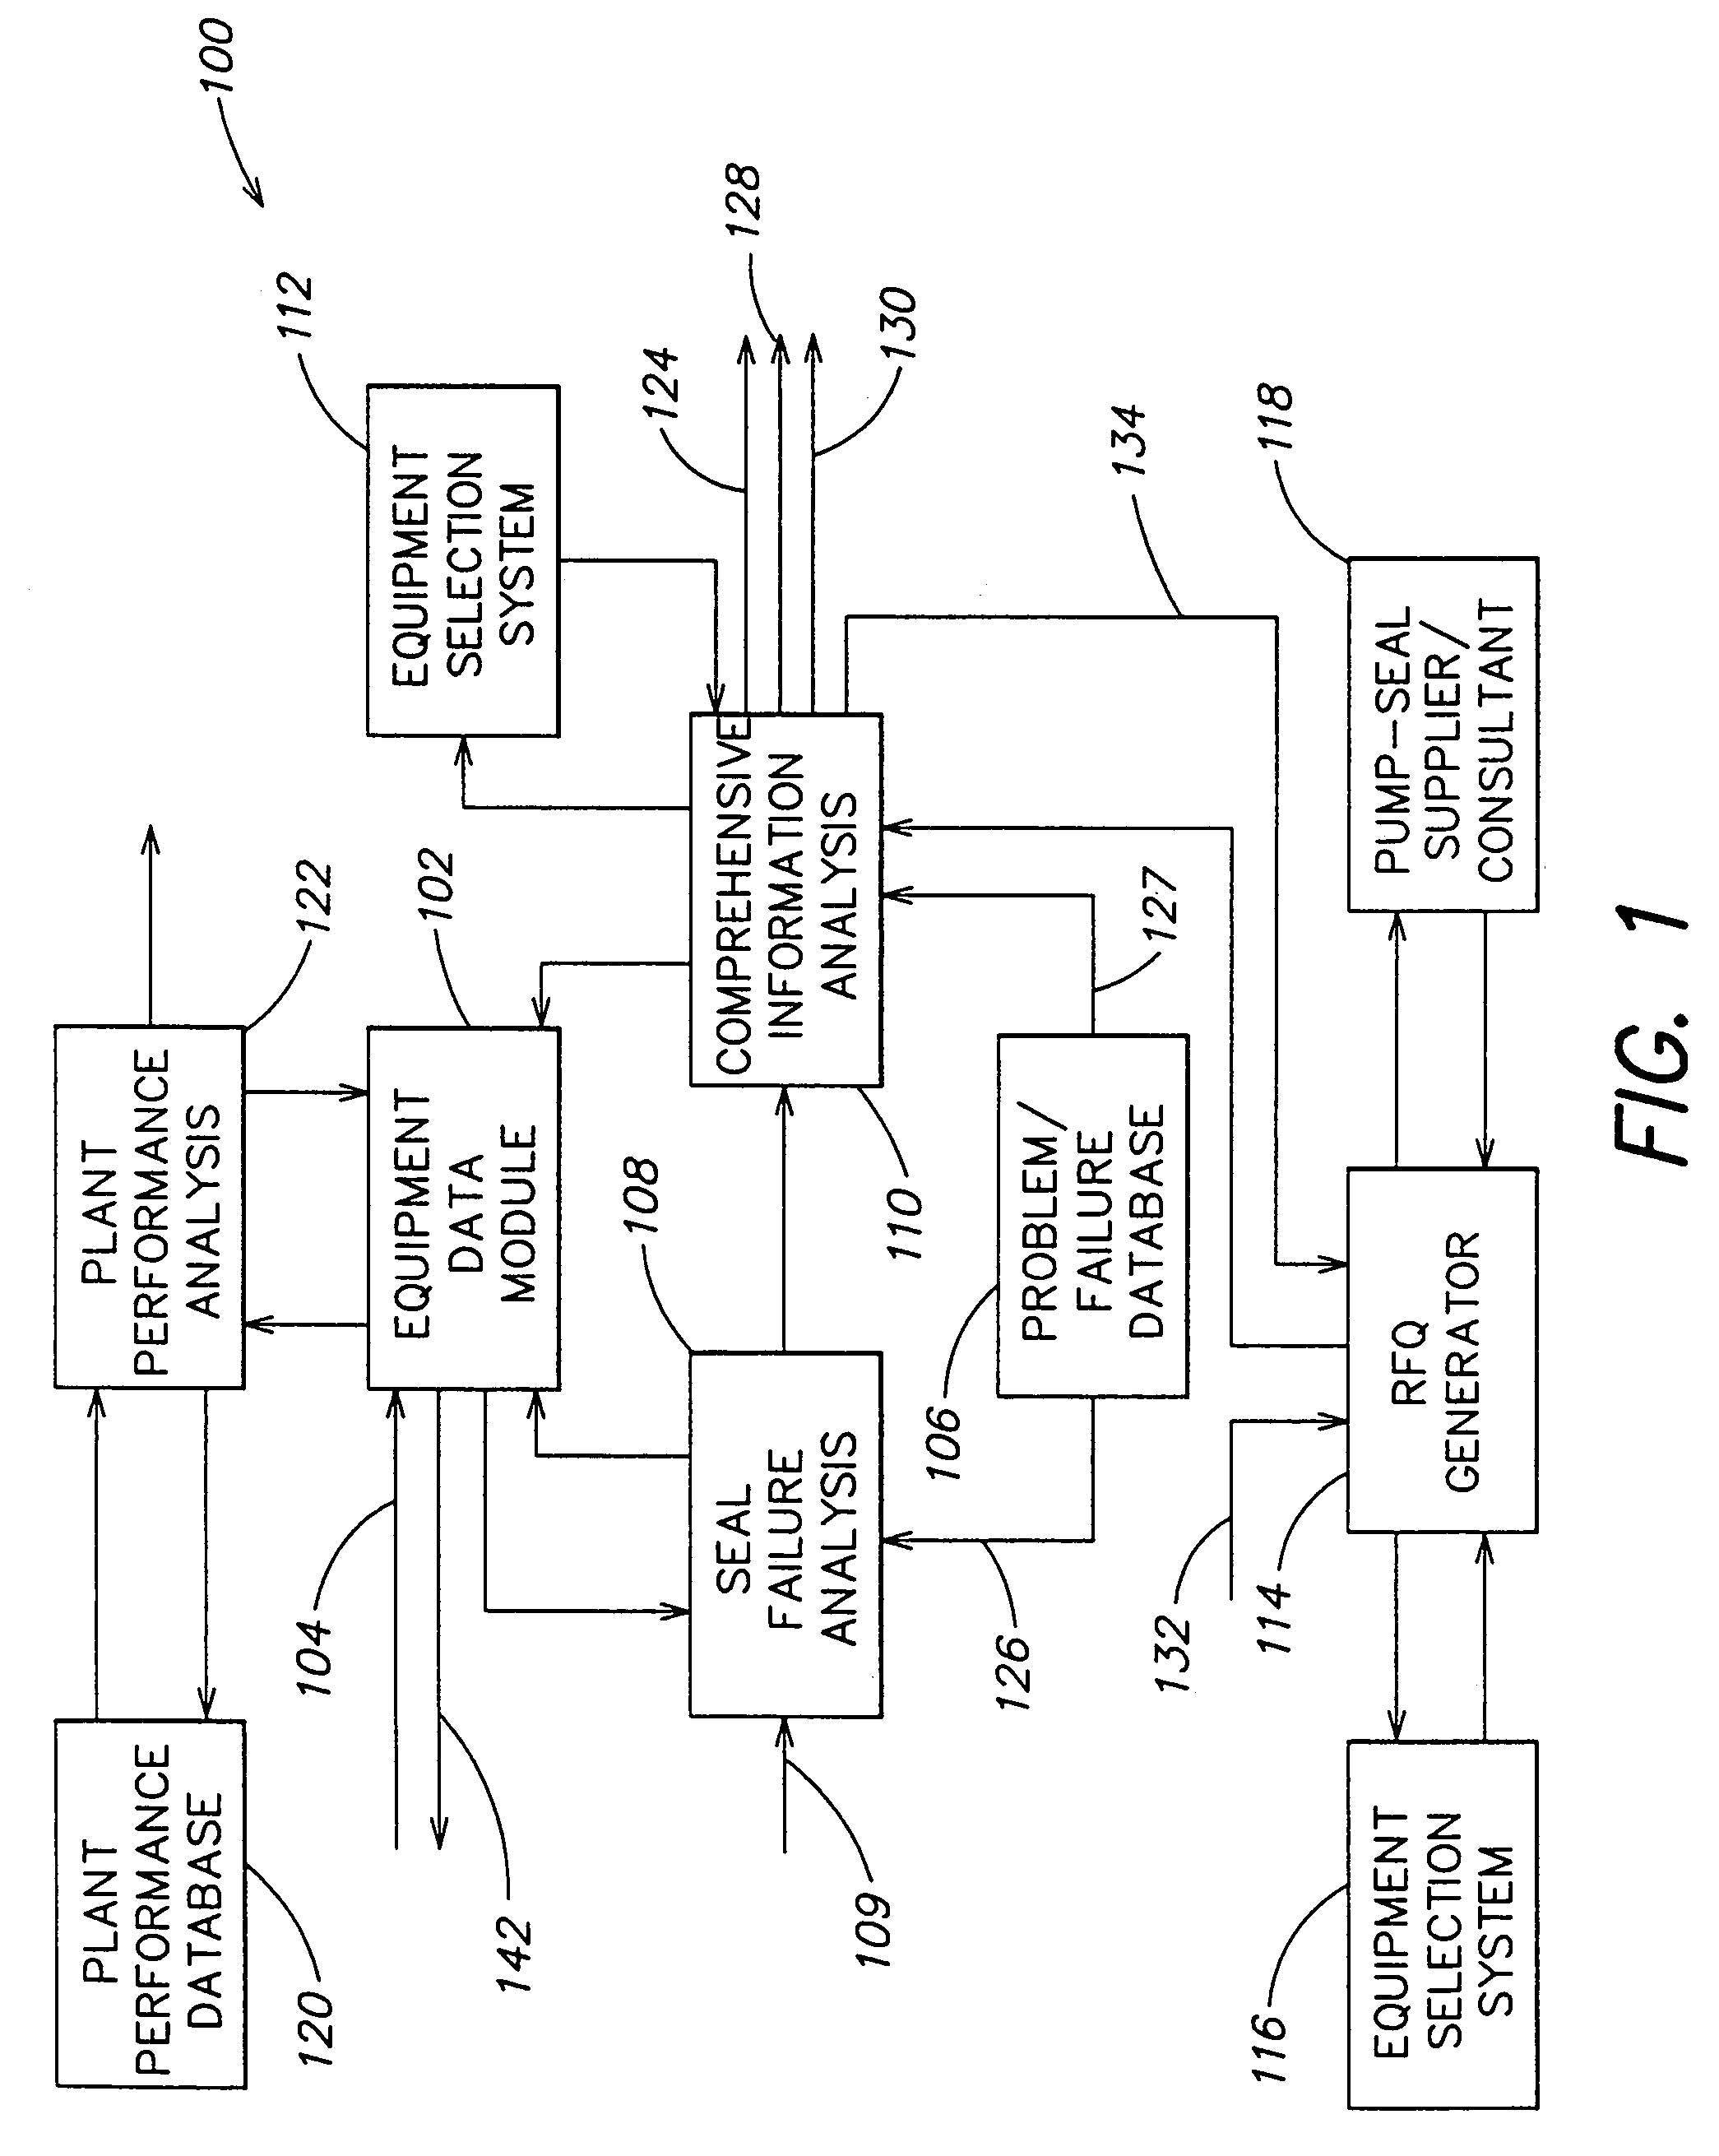 Apparatus and method for monitoring and maintaining plant equipment